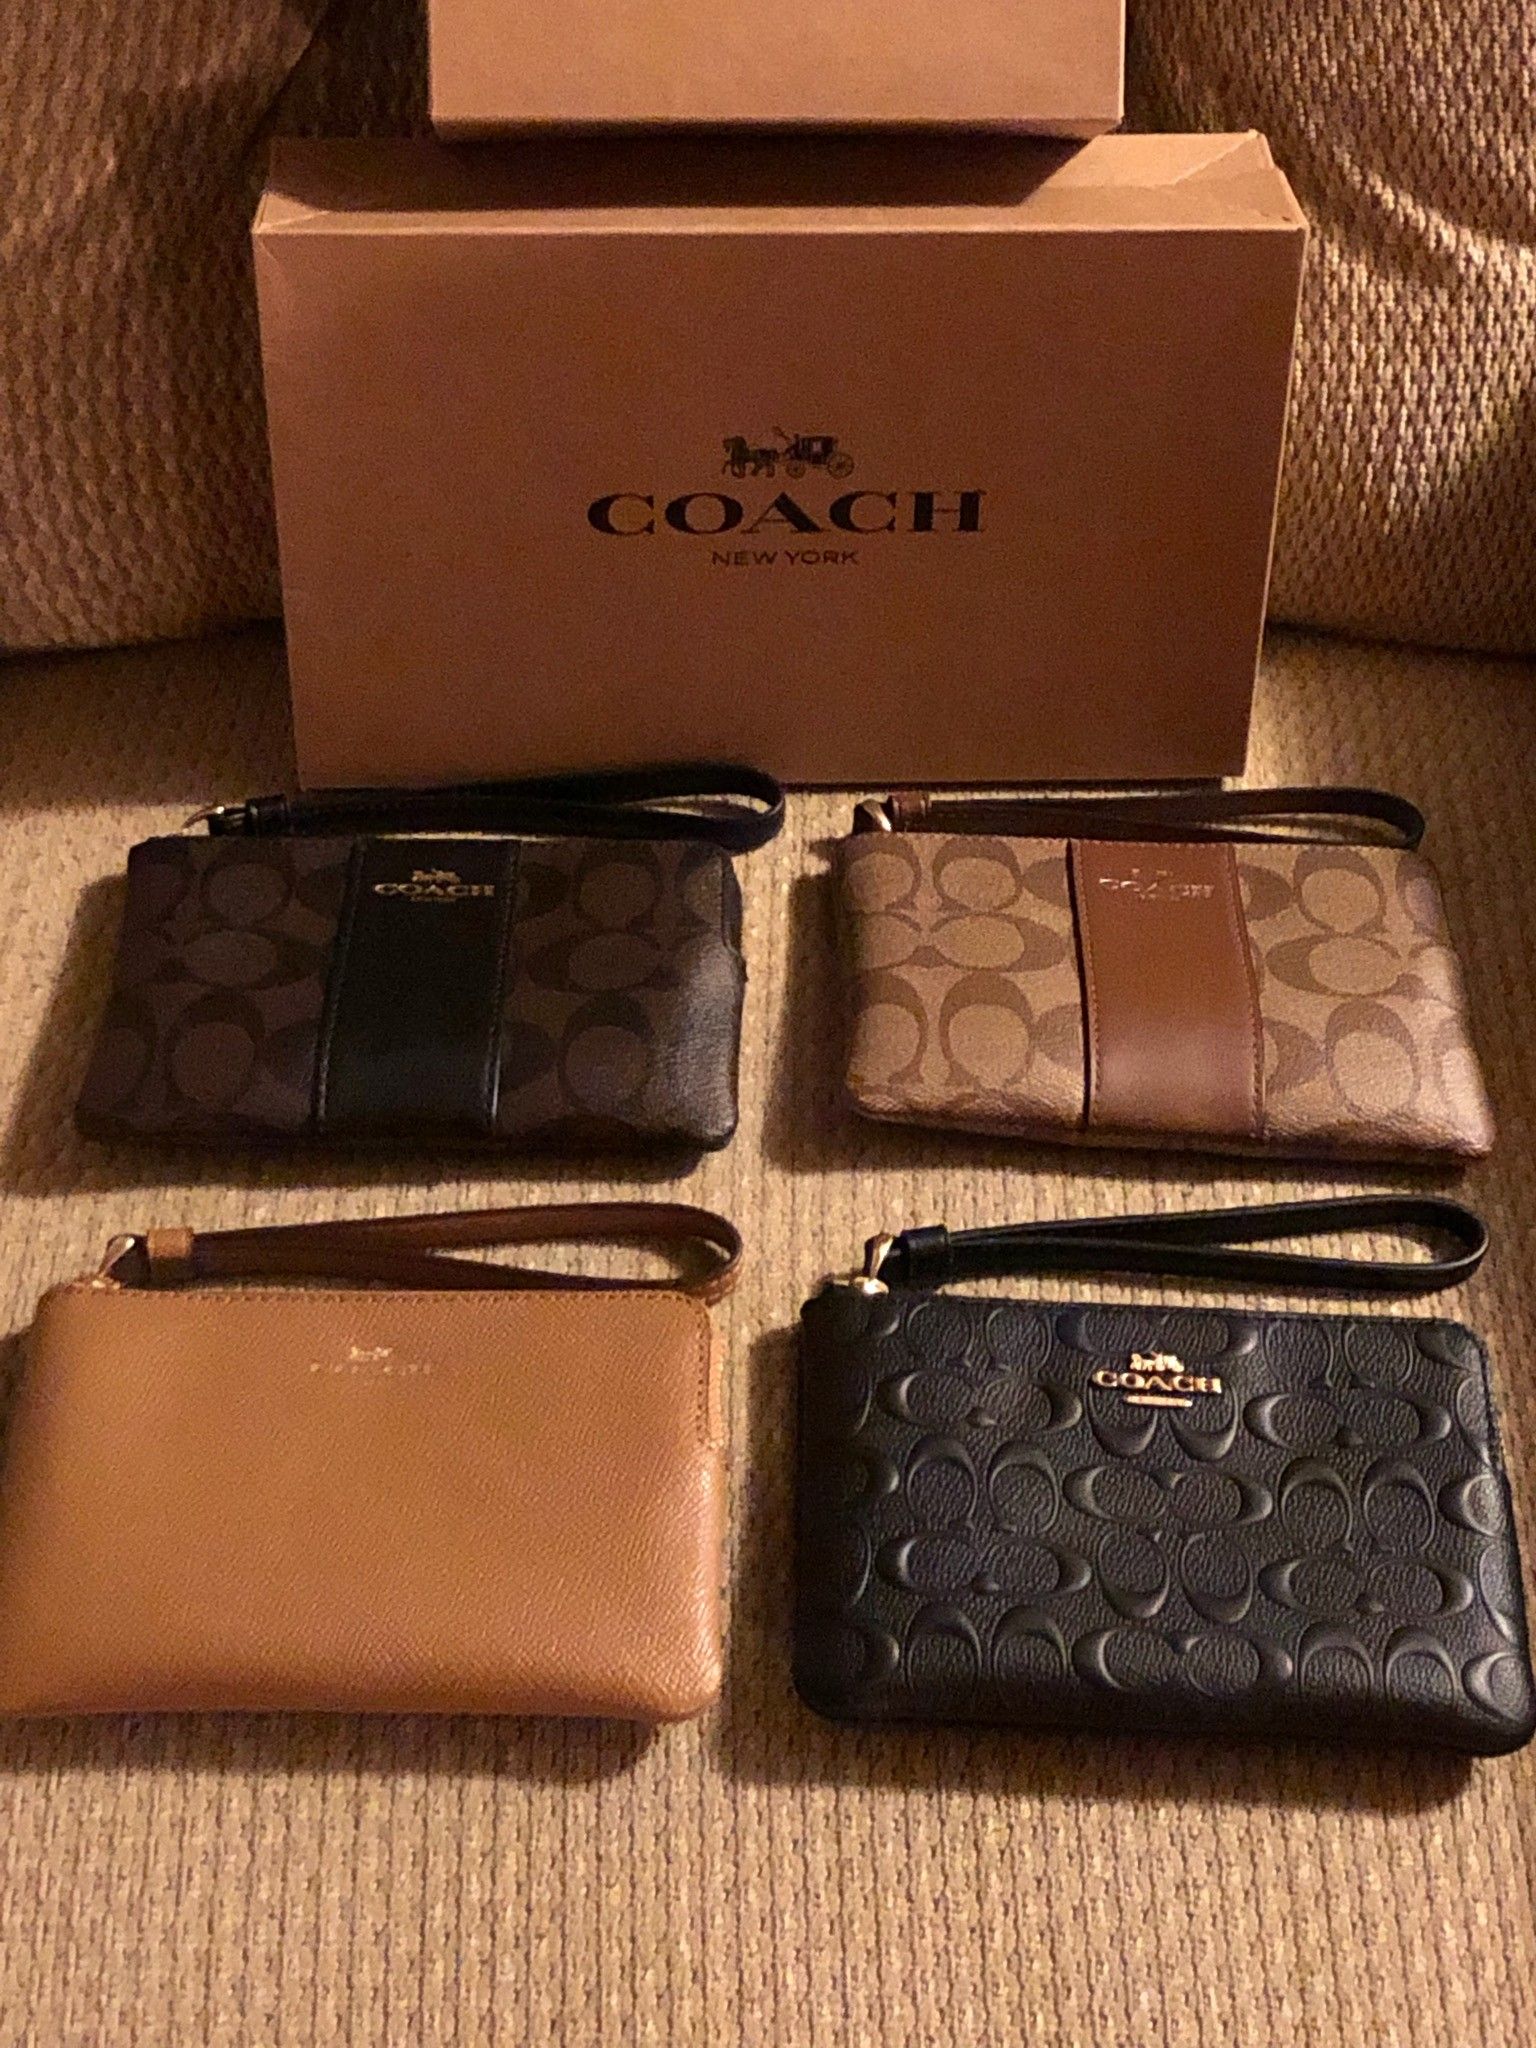 Brand new Authentic coach bag with tags